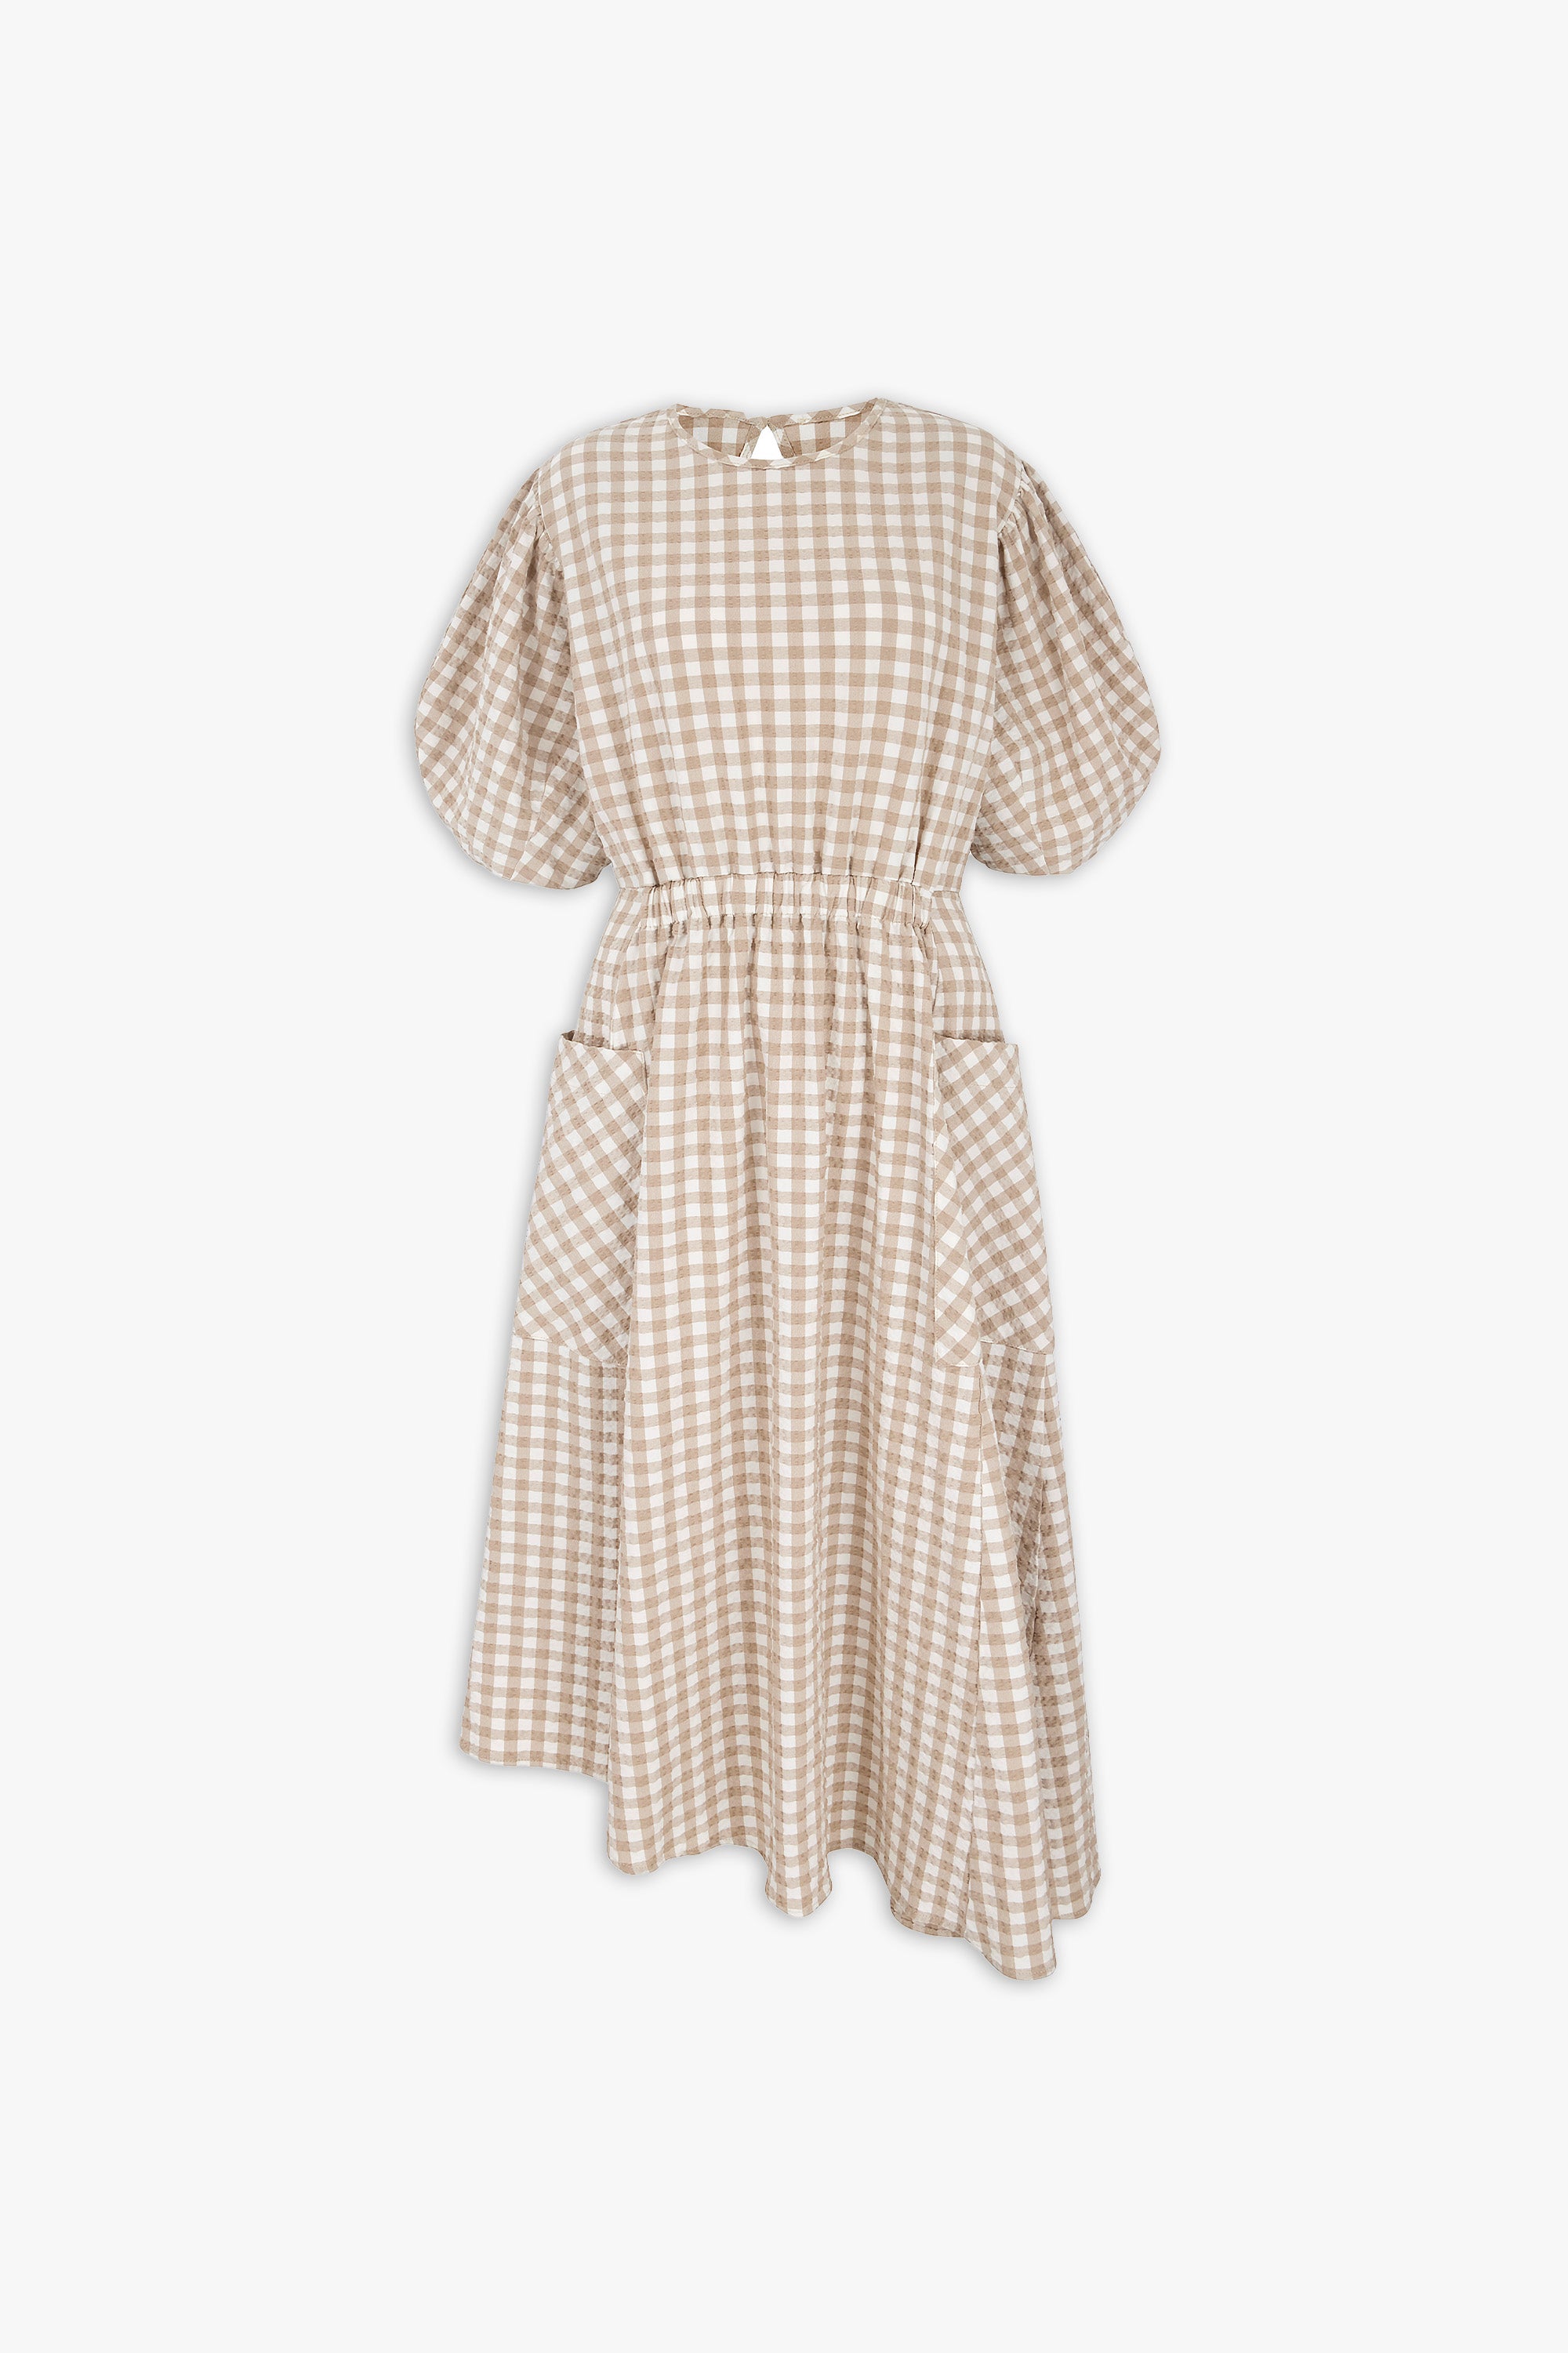 Harlin | Dress with Curve Sleeve in Beige Check | ALIGNE